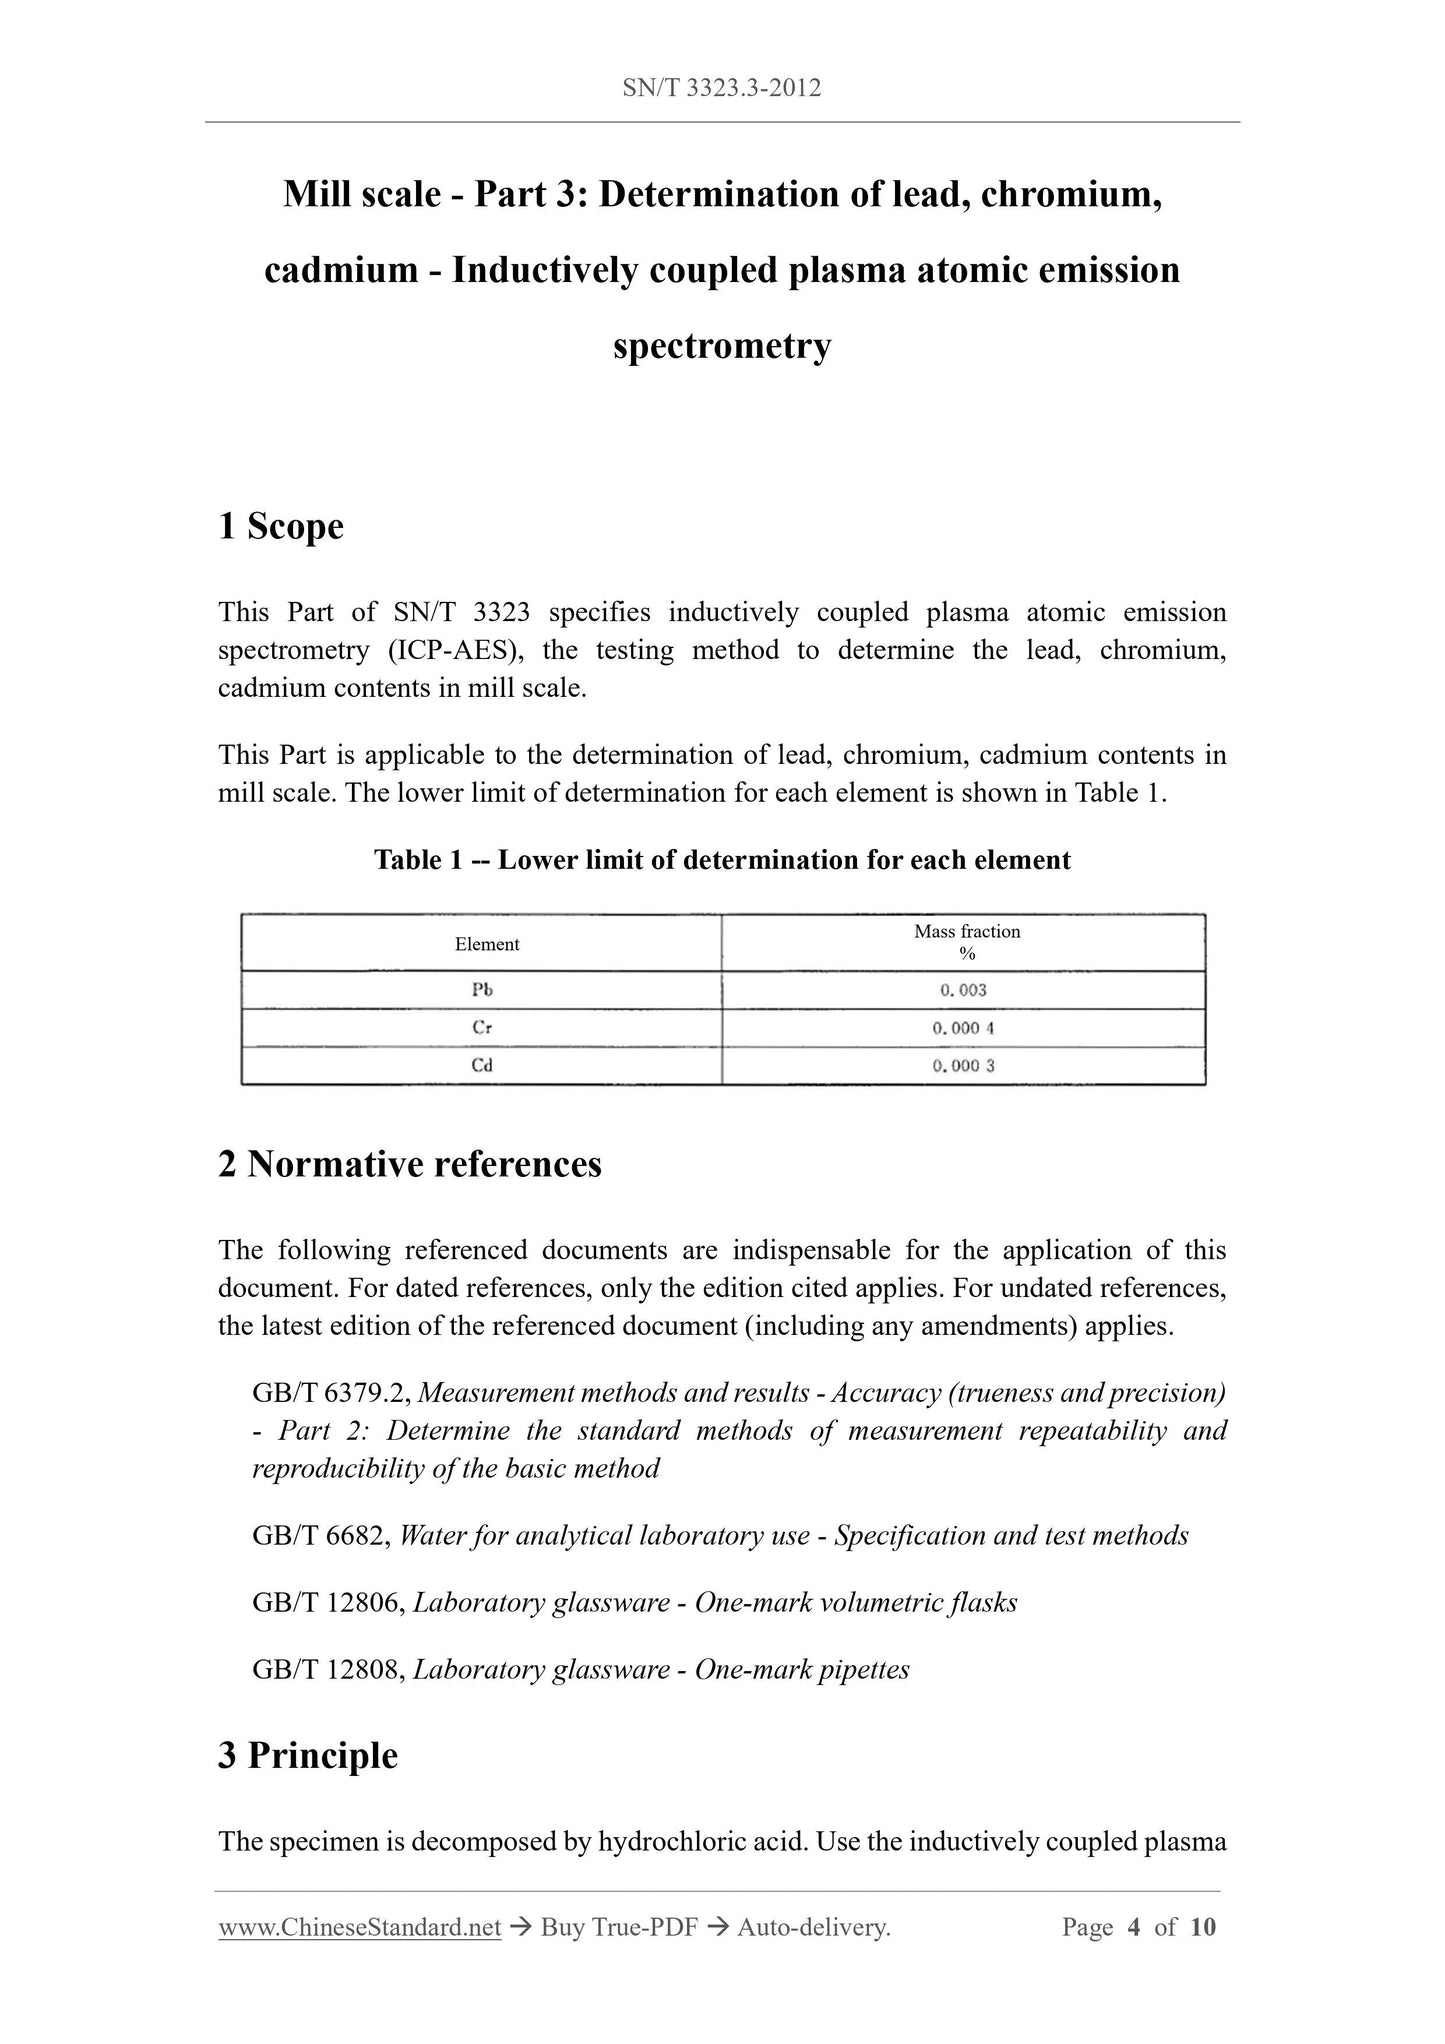 SN/T 3323.3-2012 Page 3